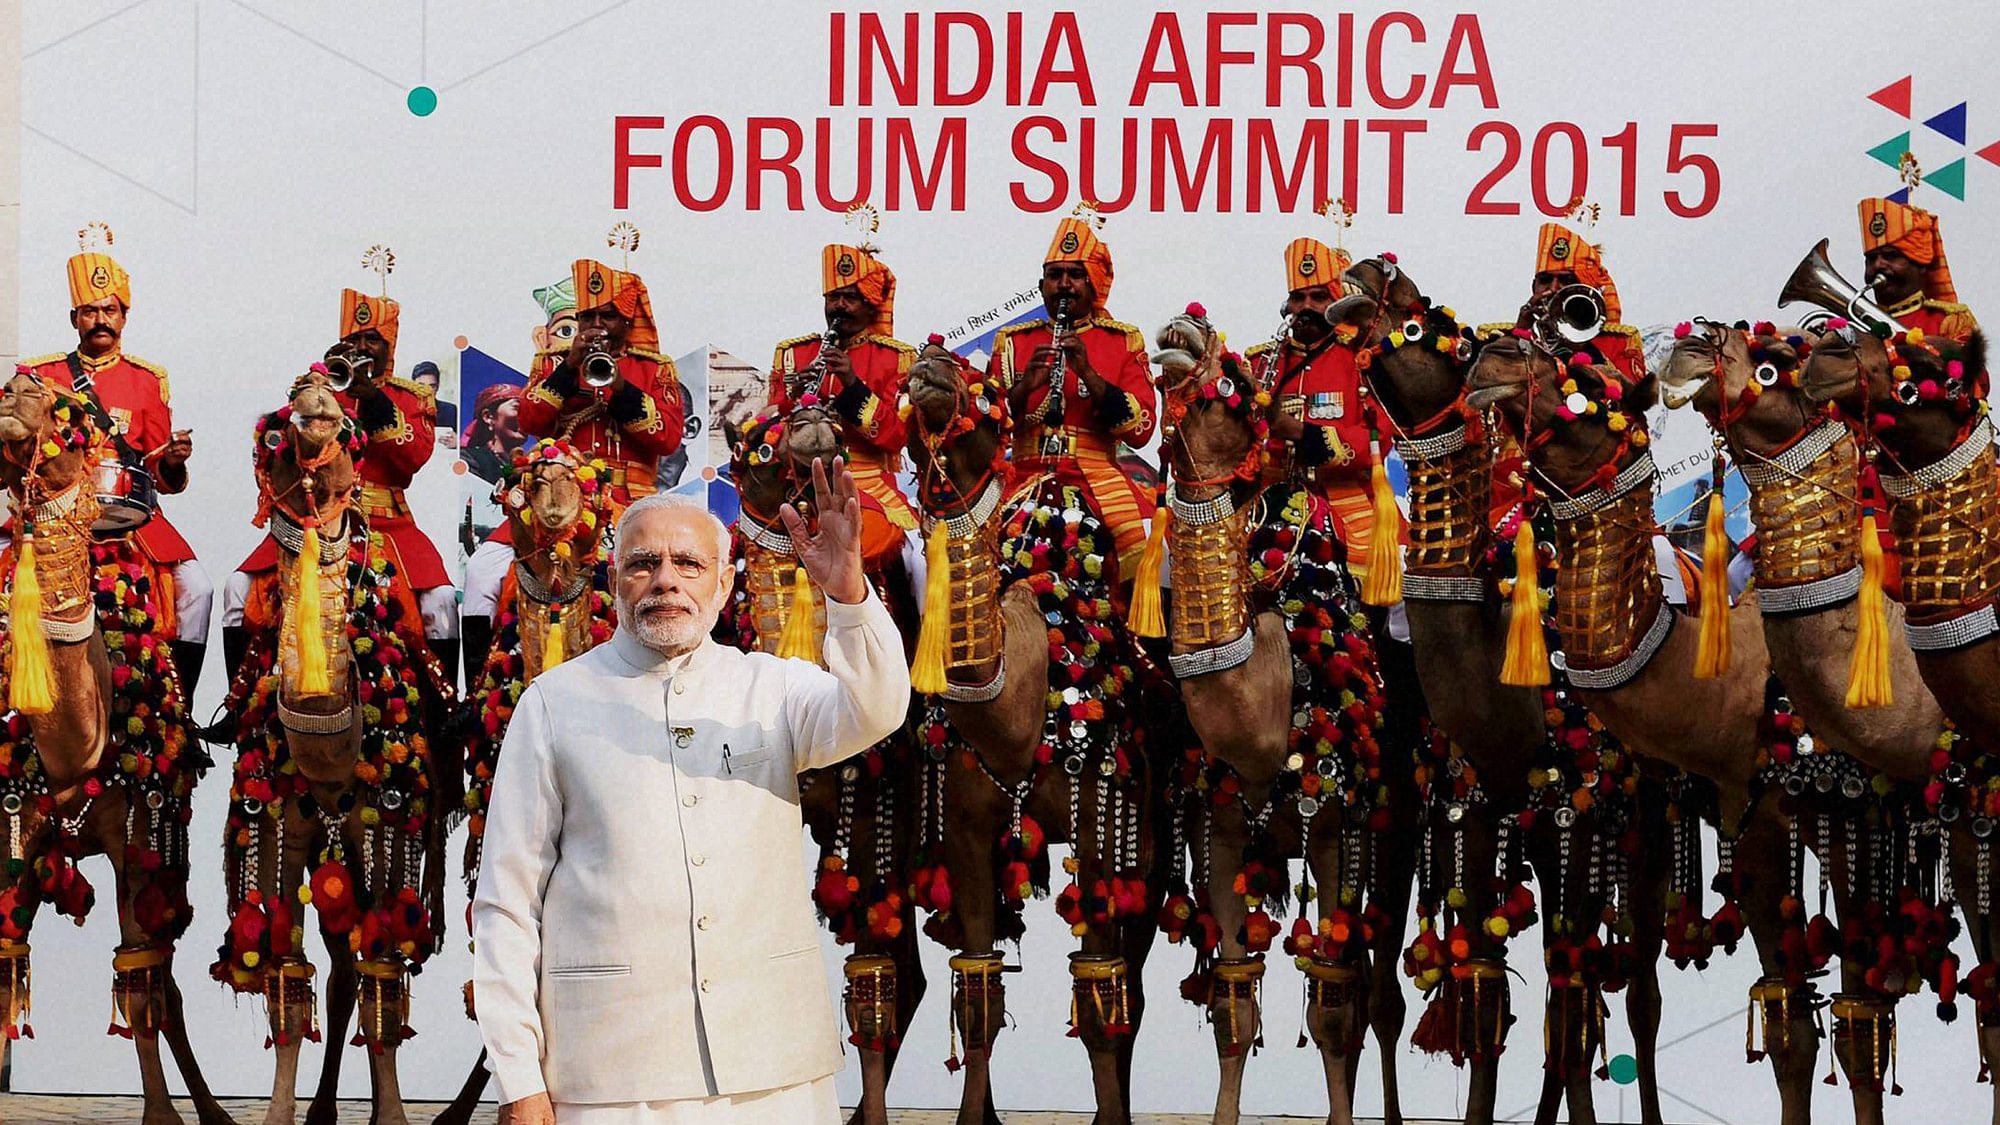 Prime Minister Narendra Modi during the India-Africa Forum Summit at Indira Gandhi Sports Complex, in New Delhi on Thursday. (Photo: PTI)